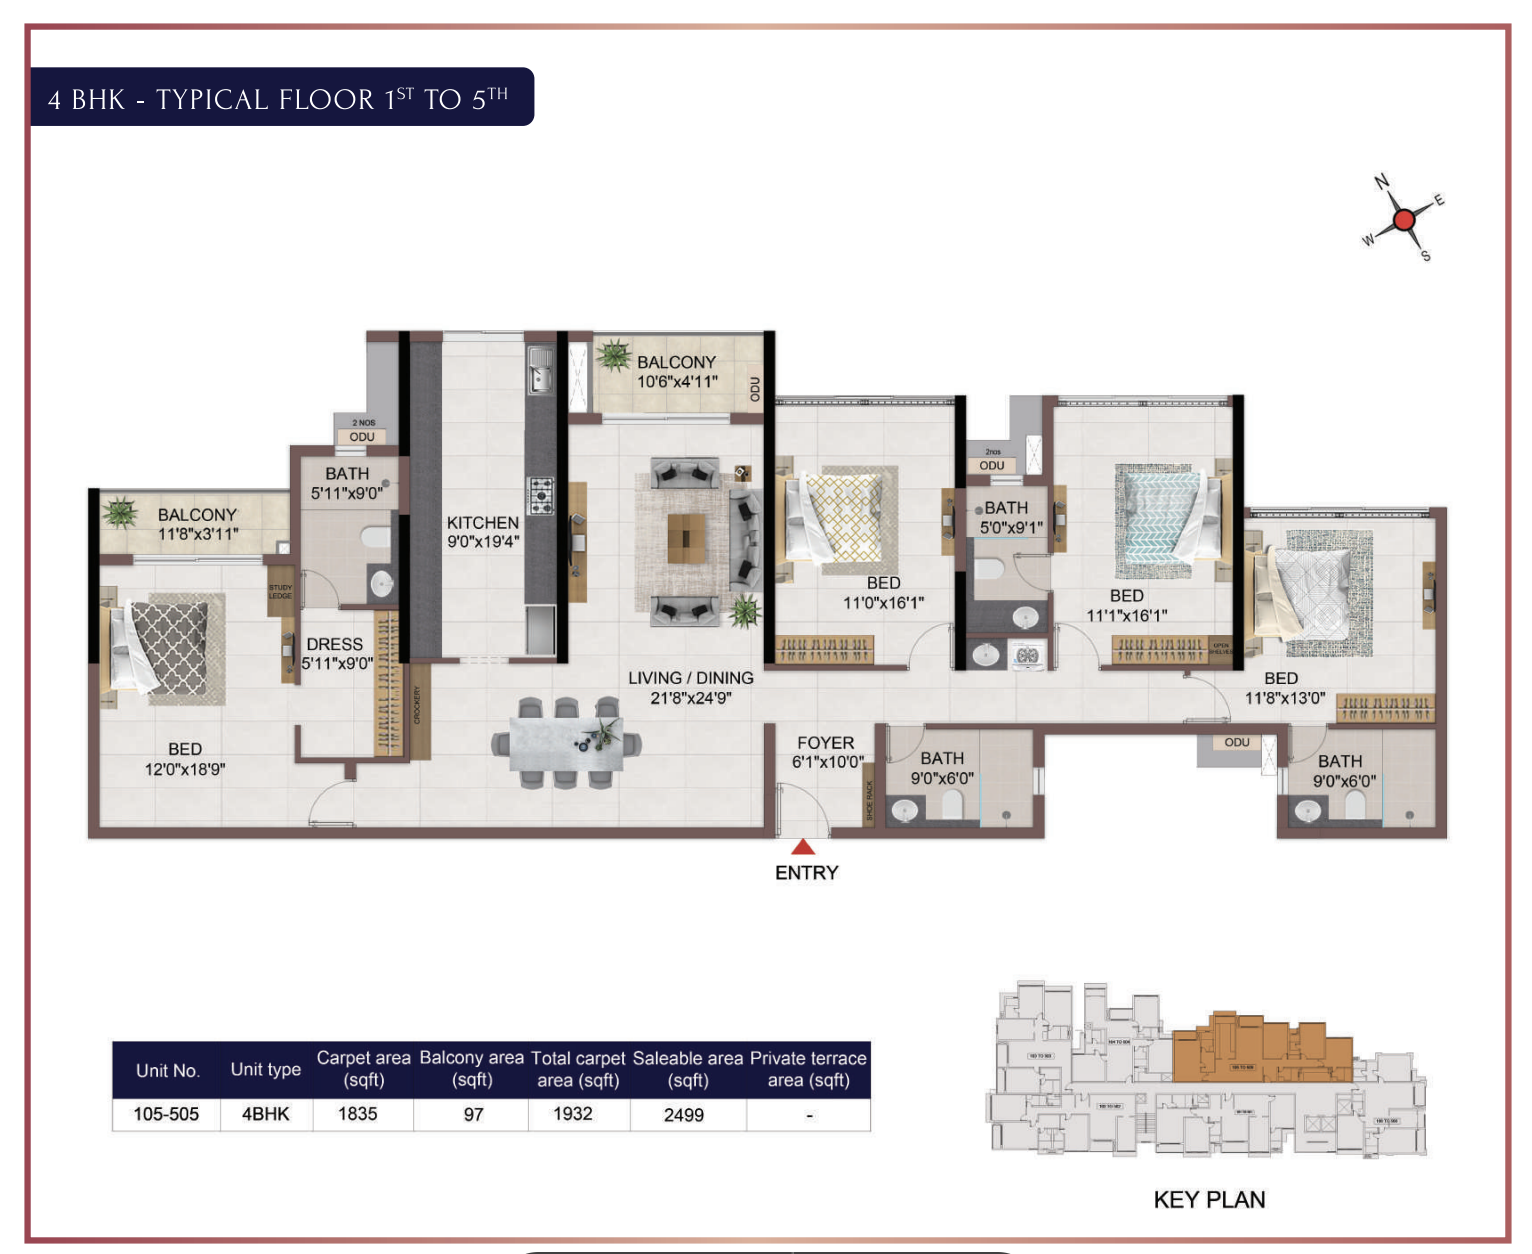 Casagrand Dior - 4BHK - Typical Floor Plan - 1st to 5th